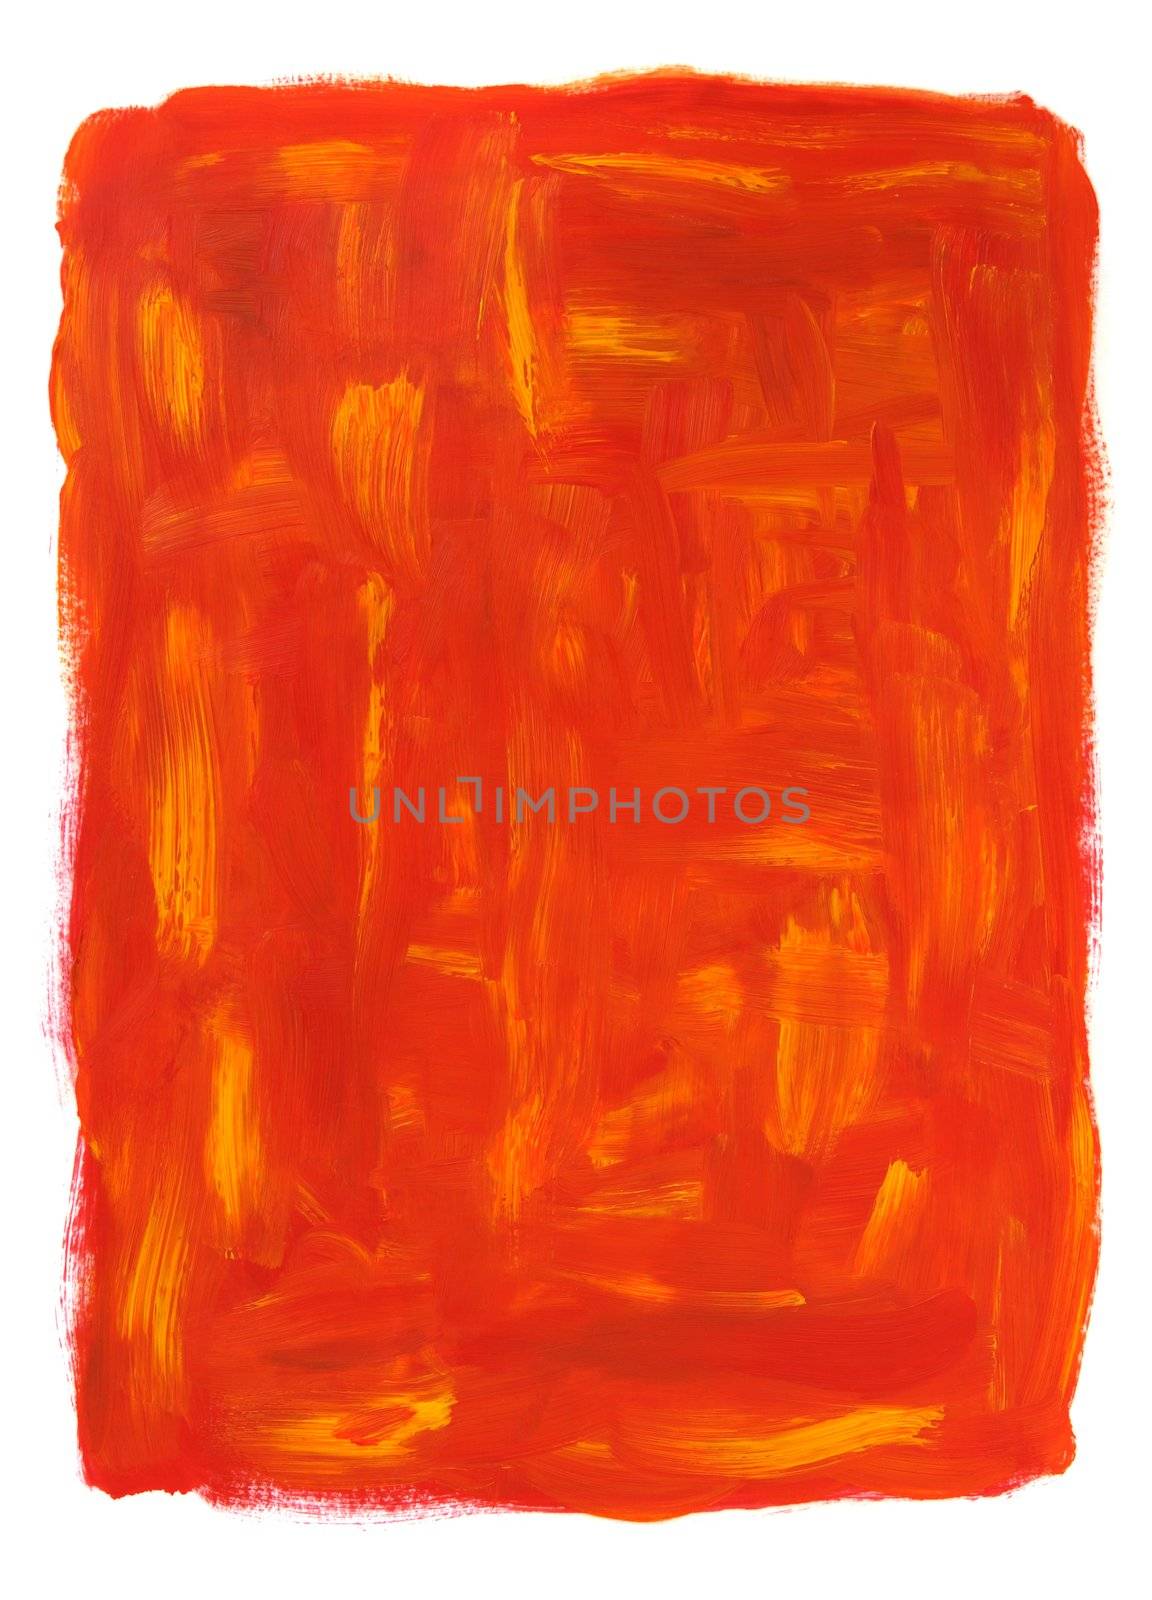 Vibrant orange abstract oil painting, isolated on white. Hand-painted.